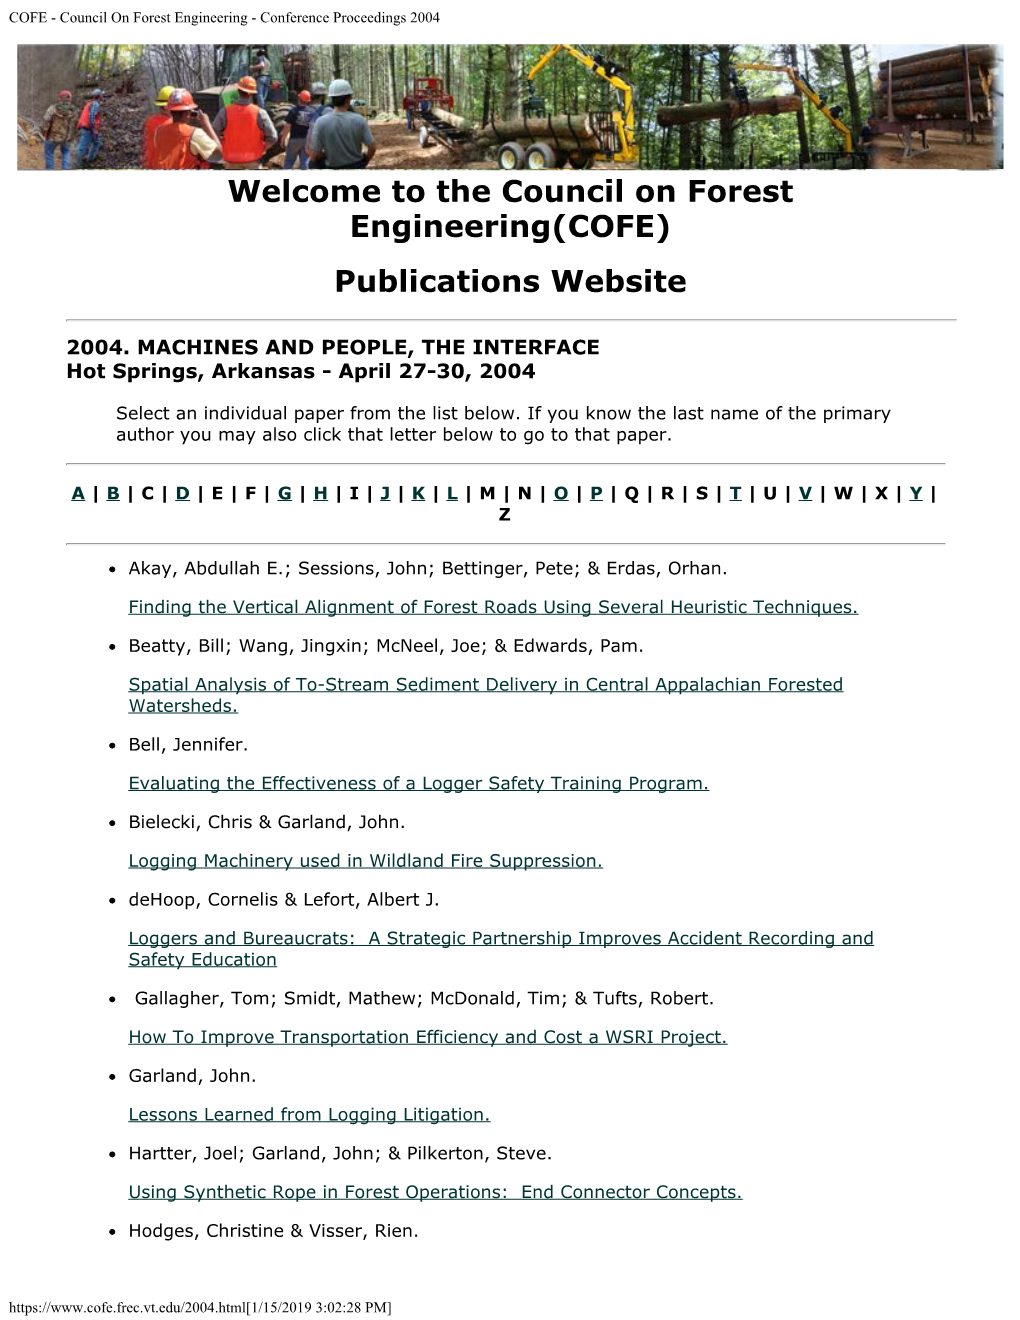 COFE - Council on Forest Engineering - Conference Proceedings 2004